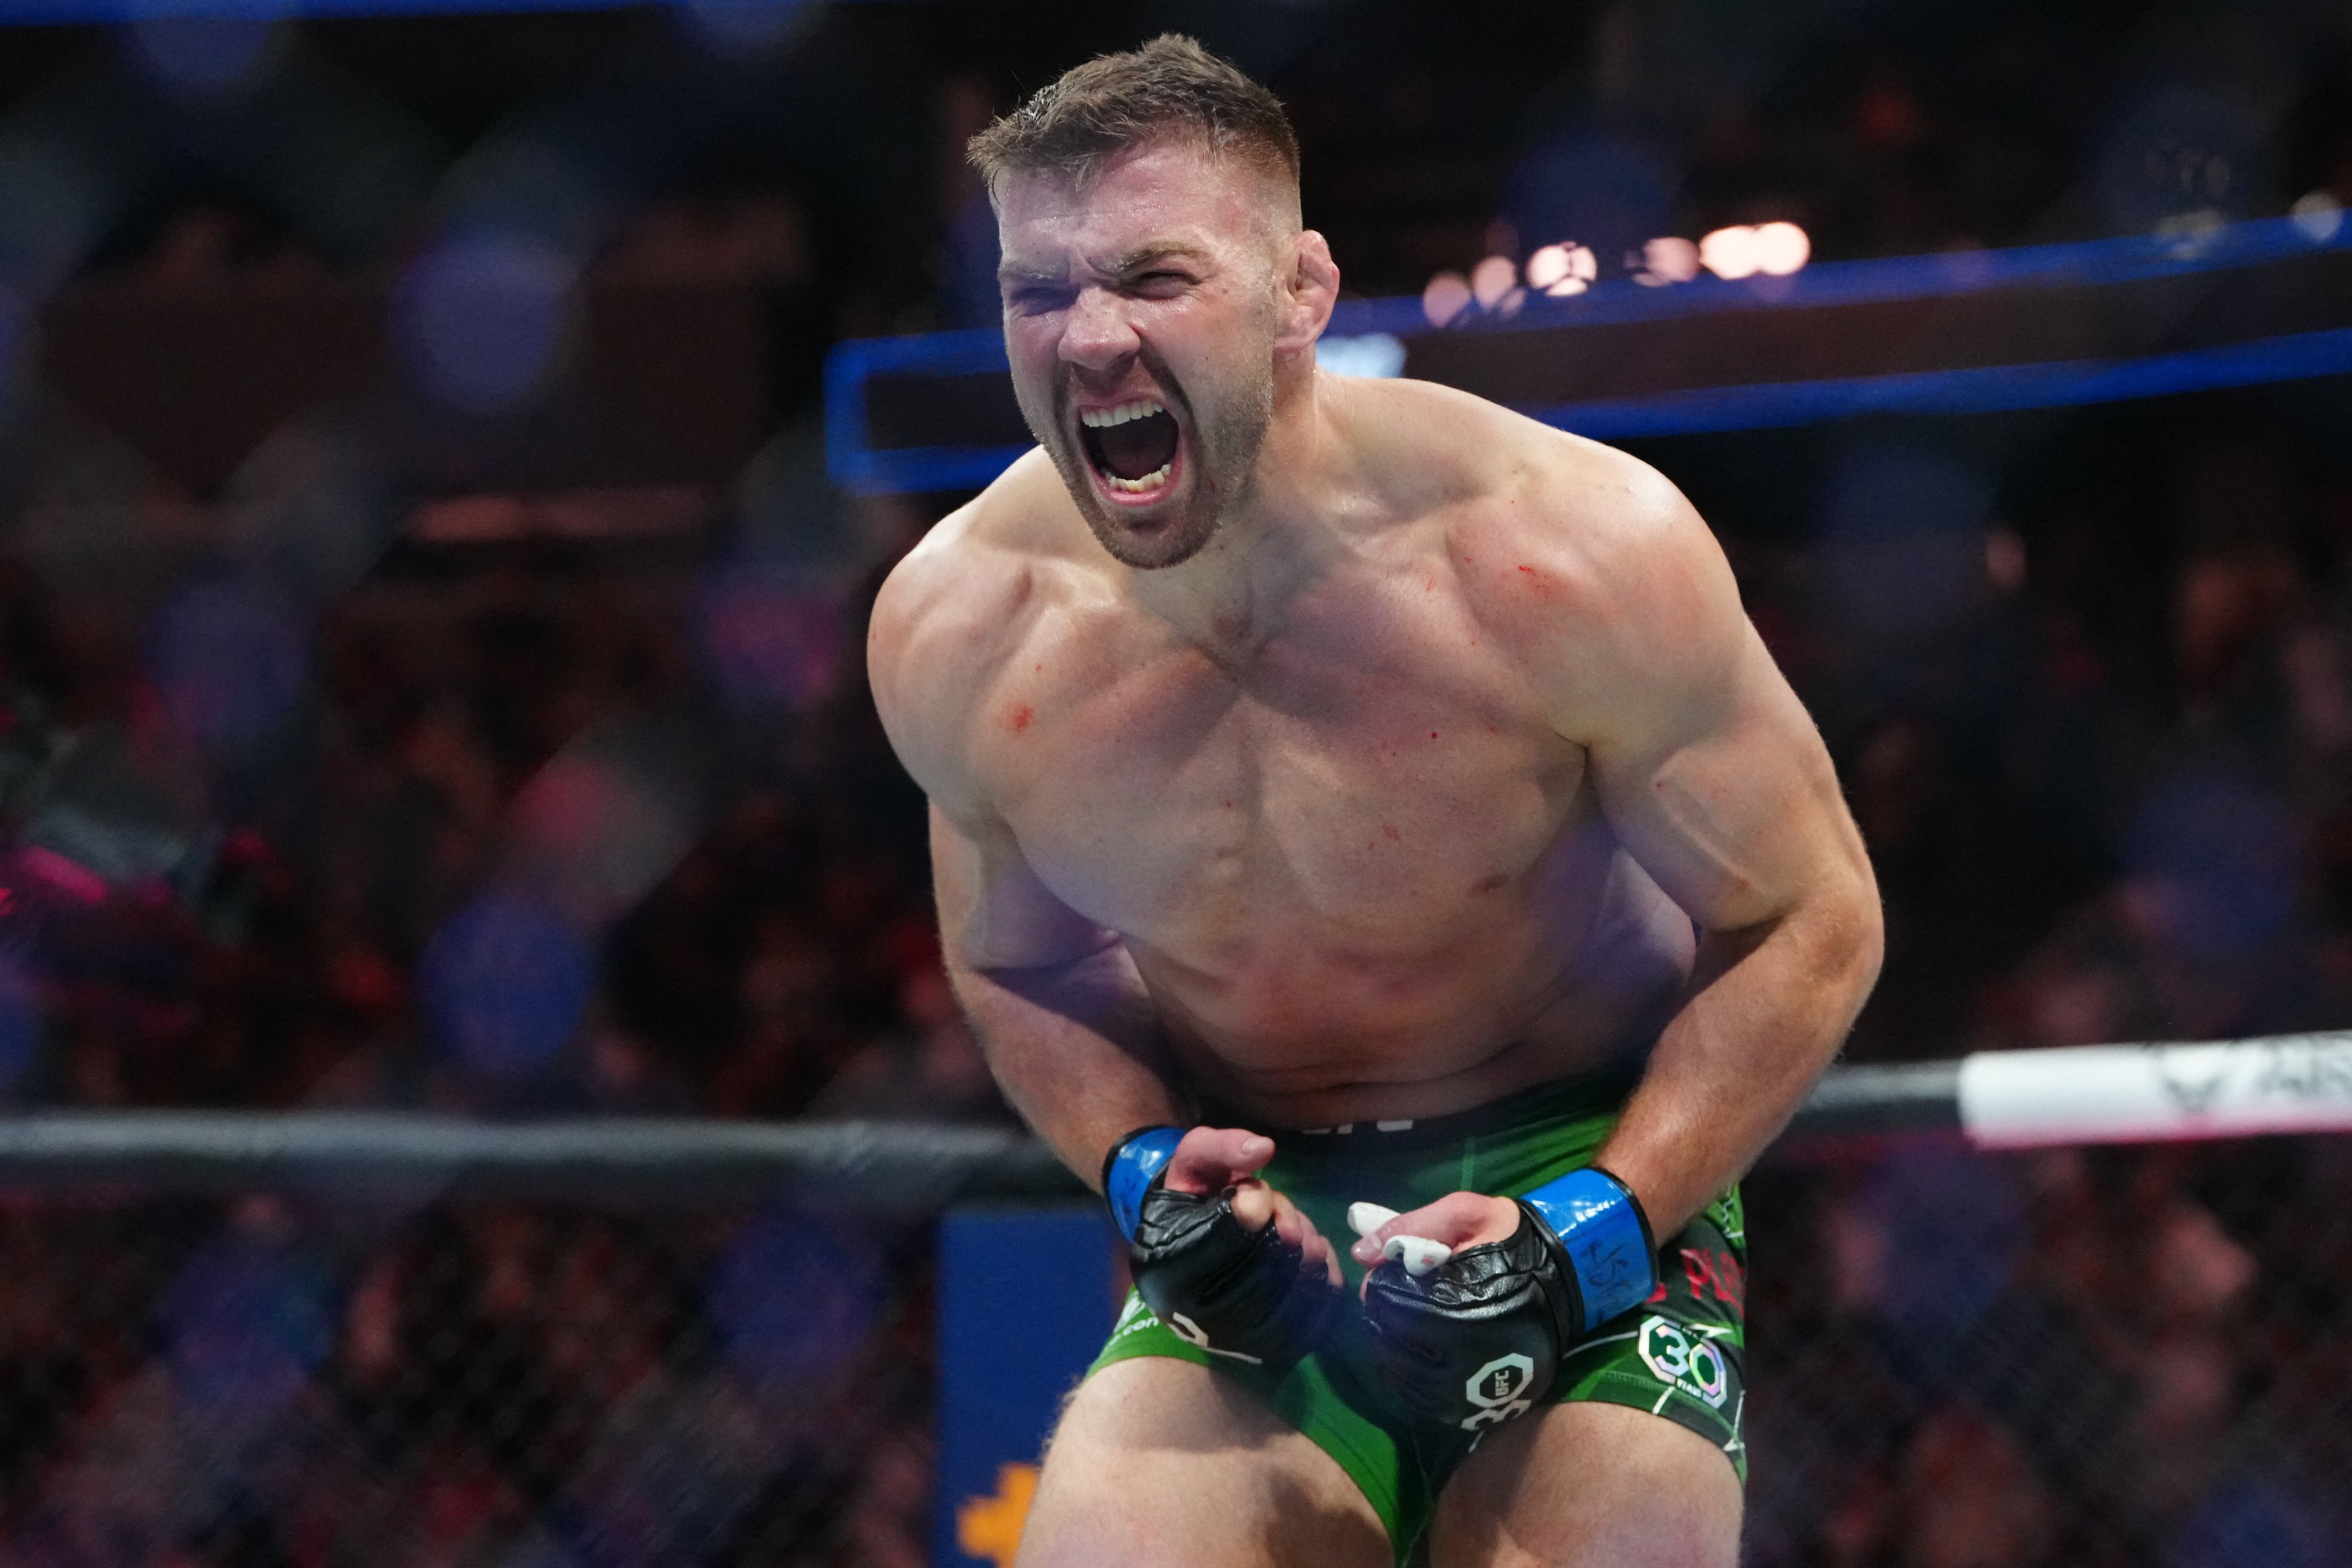 Dricus Du Plessis reacts after defeating Robert Whittaker during UFC 290 at T-Mobile Arena. Photo: USA TODAY Sports